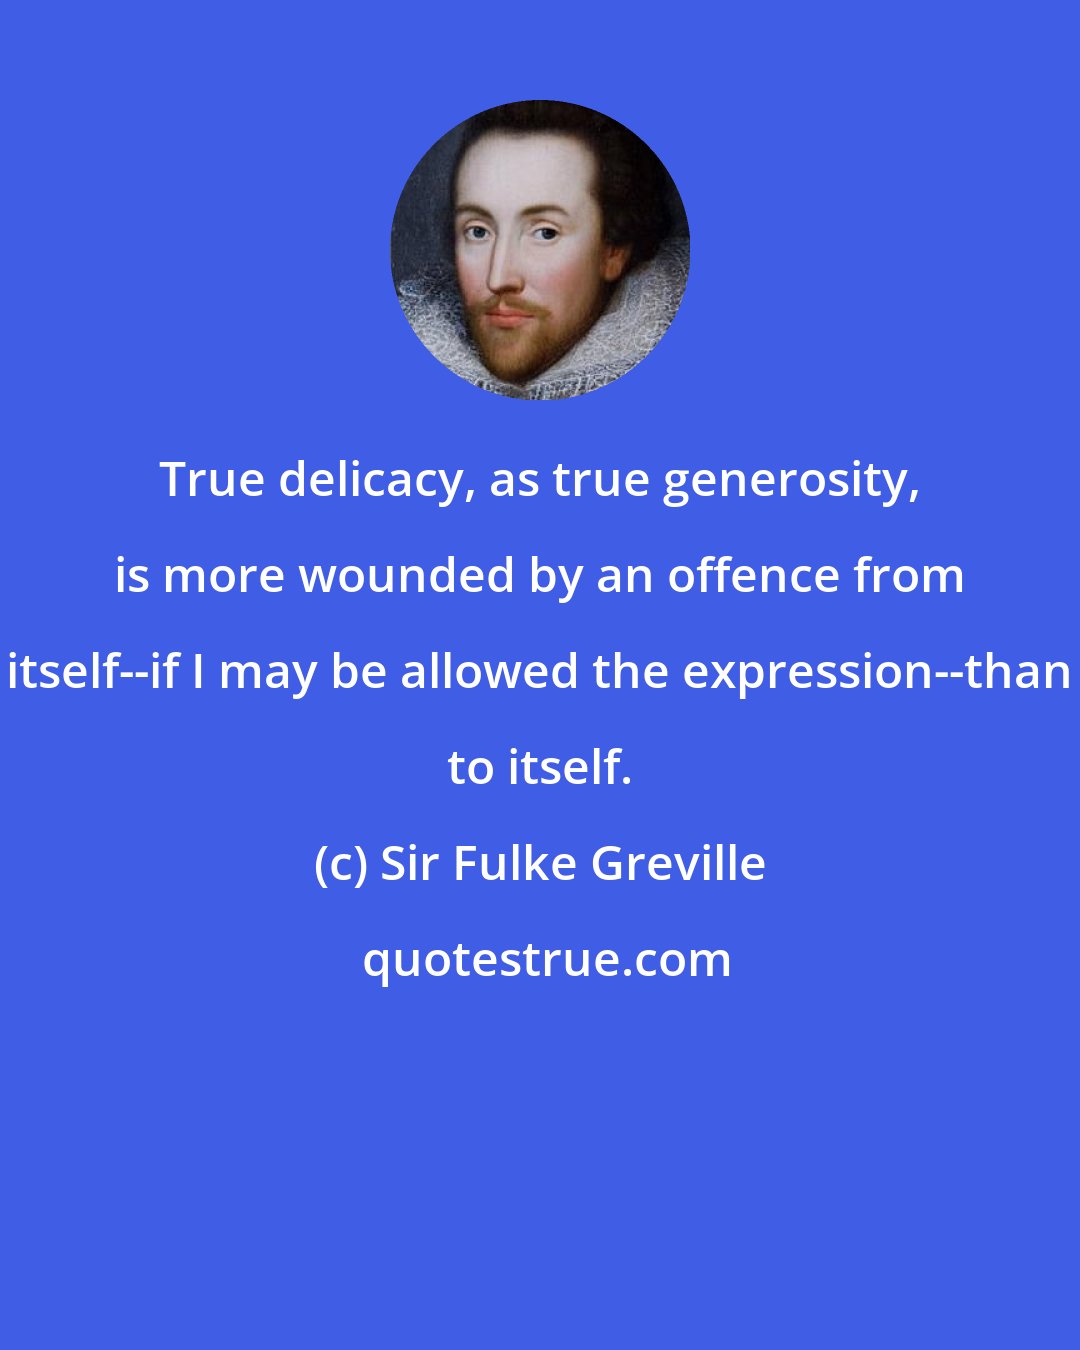 Sir Fulke Greville: True delicacy, as true generosity, is more wounded by an offence from itself--if I may be allowed the expression--than to itself.